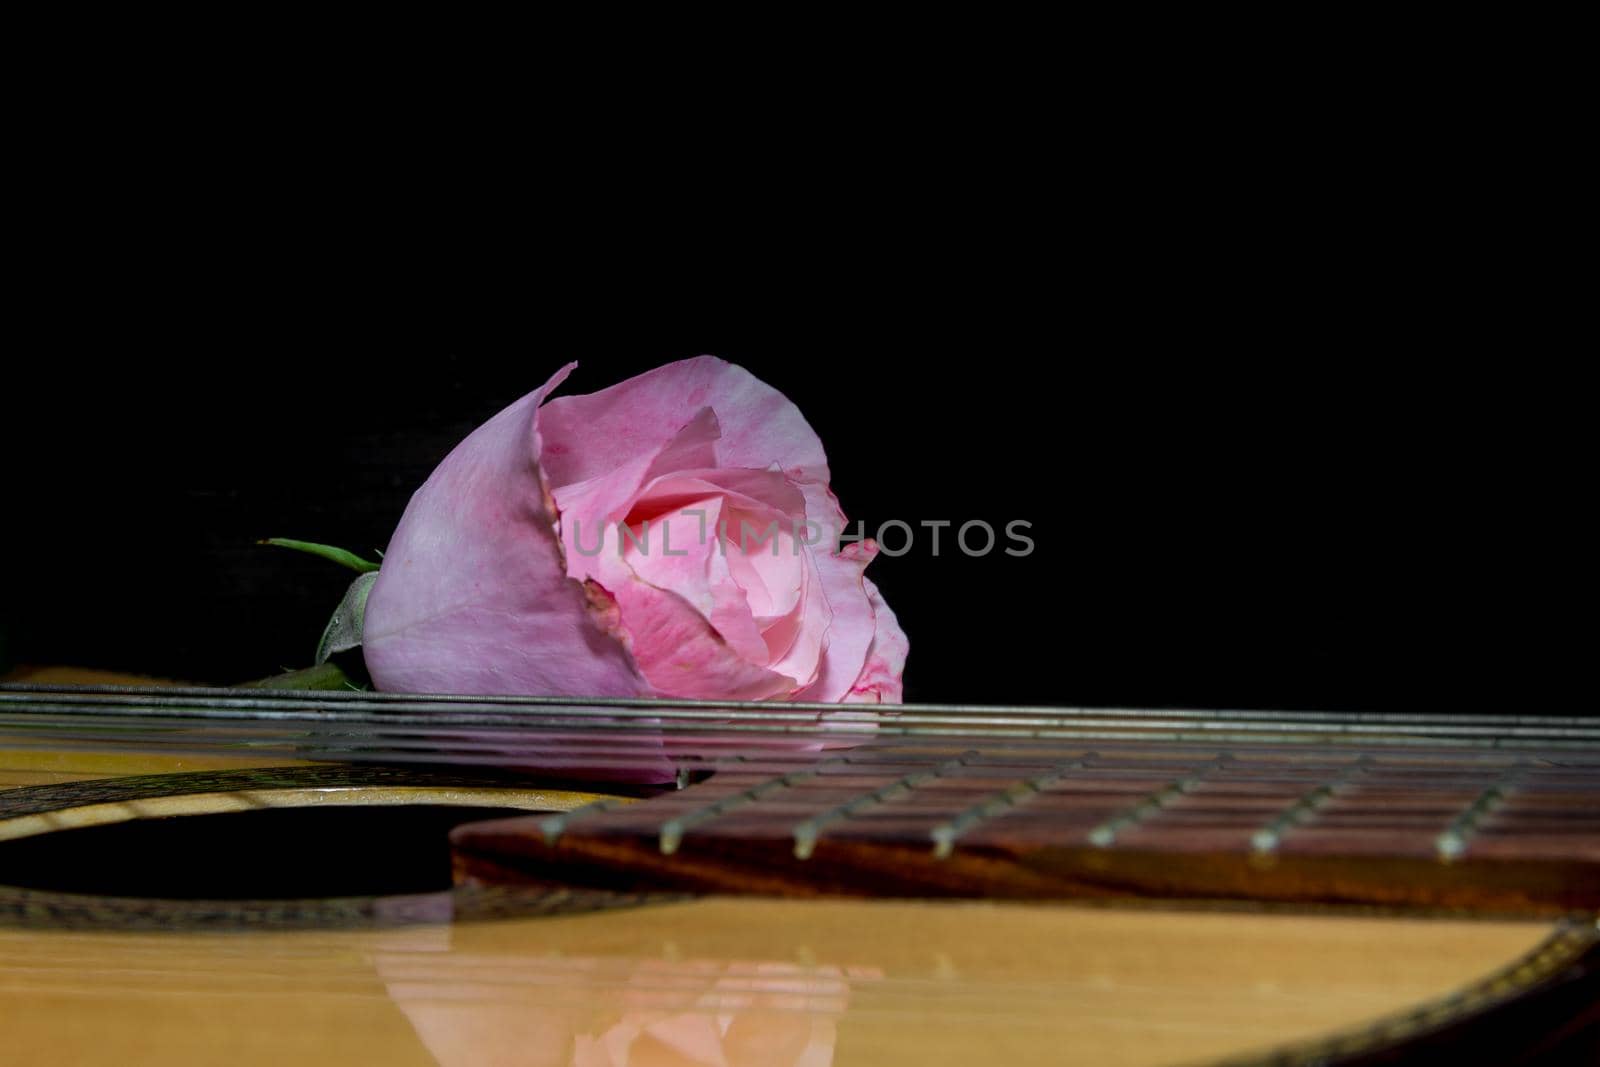 a pink bud on the guitar strings by GabrielaBertolini